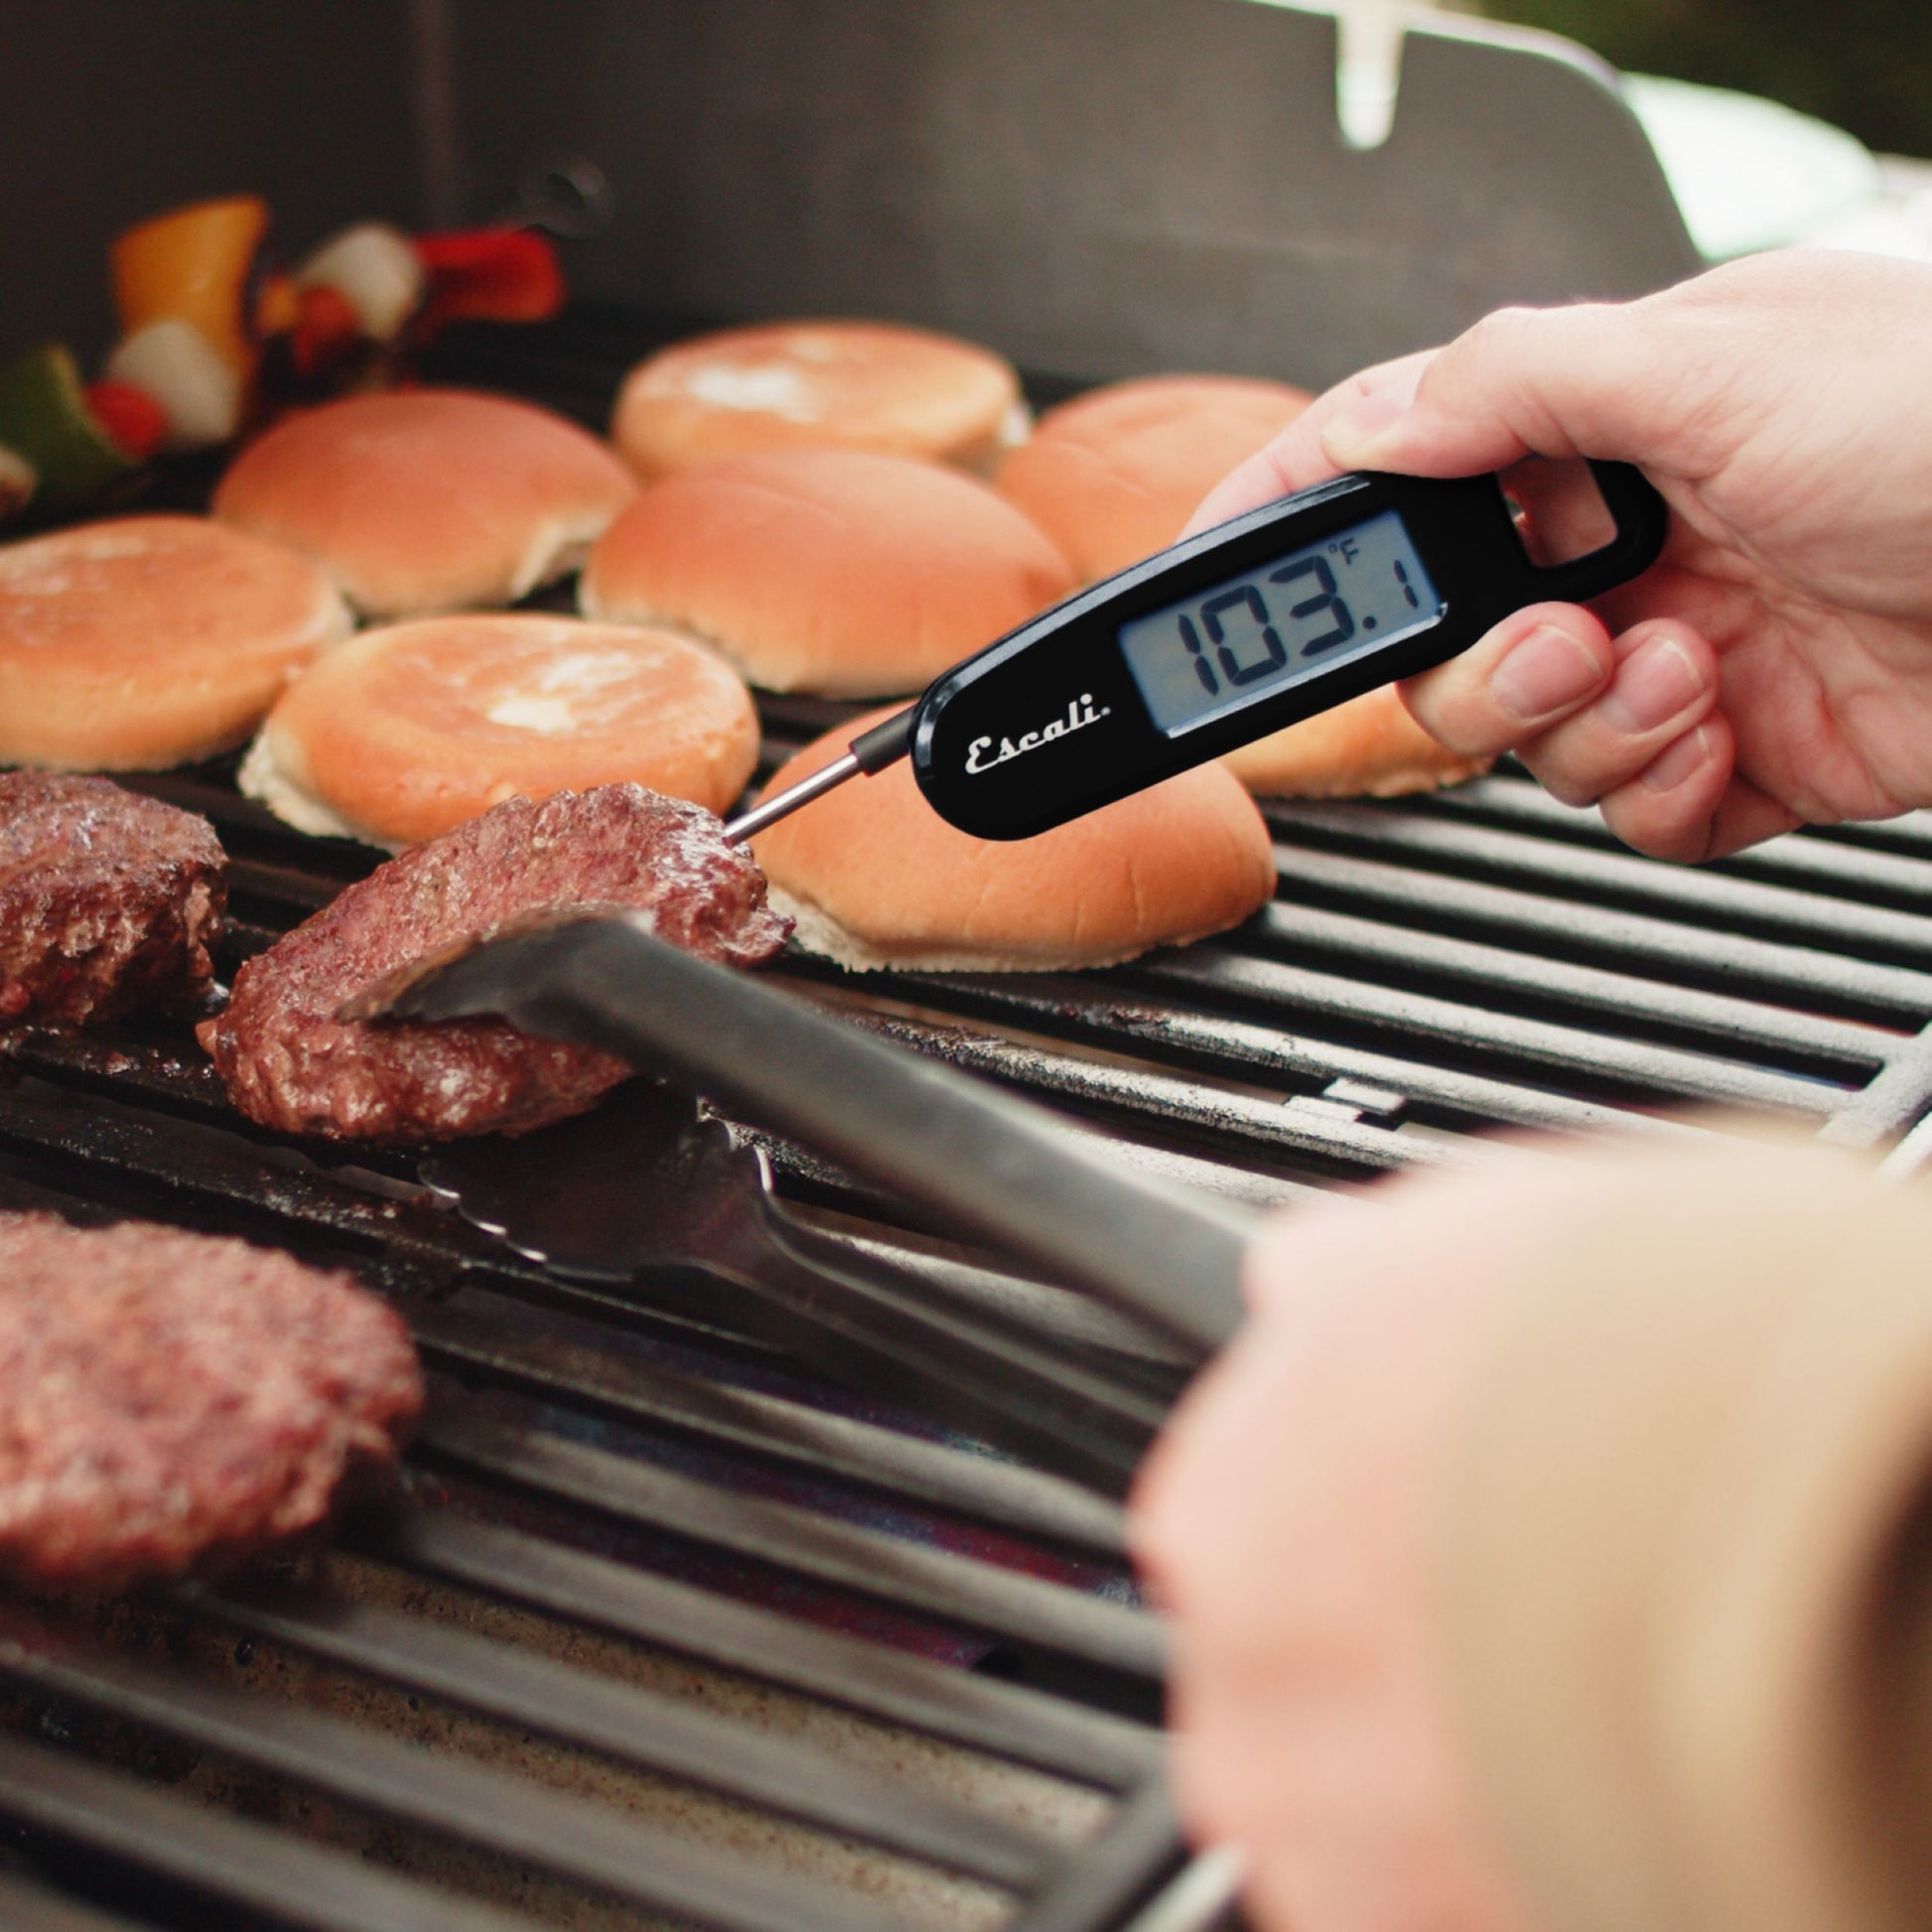 Digital Thermometer Compact